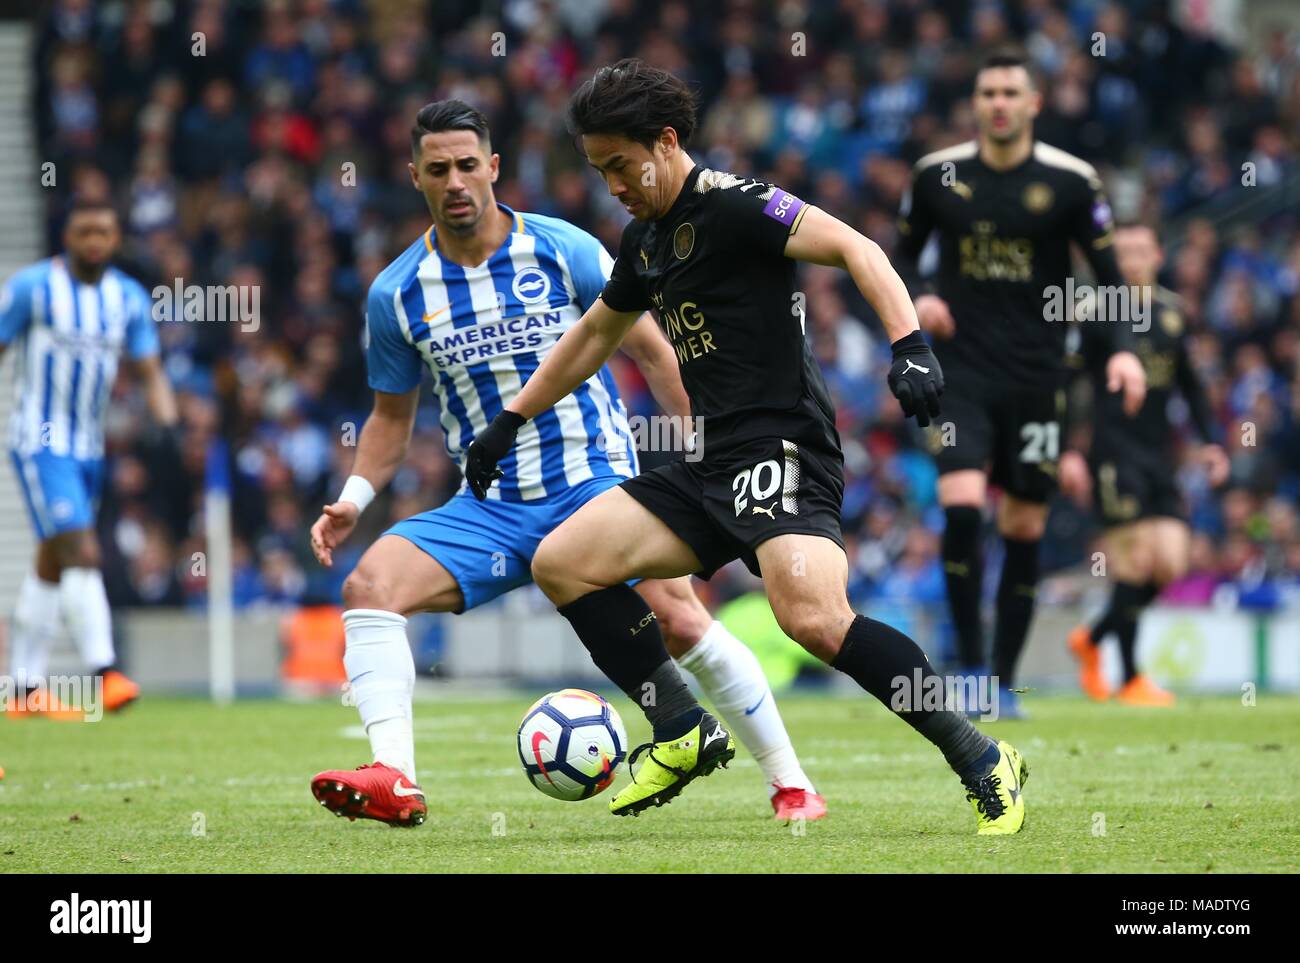 Shinji Okazaki of Leicester during the Premier League match between Brighton and Hove Albion and Leicester City at the American Express Community Stadium in Brighton and Hove. 31 Mar 2018. *** Editorial use only. No merchandising. For Football images FA and Premier League restrictions apply inc. no internet/mobile usage without FAPL license - for details contact Football Dataco *** Stock Photo